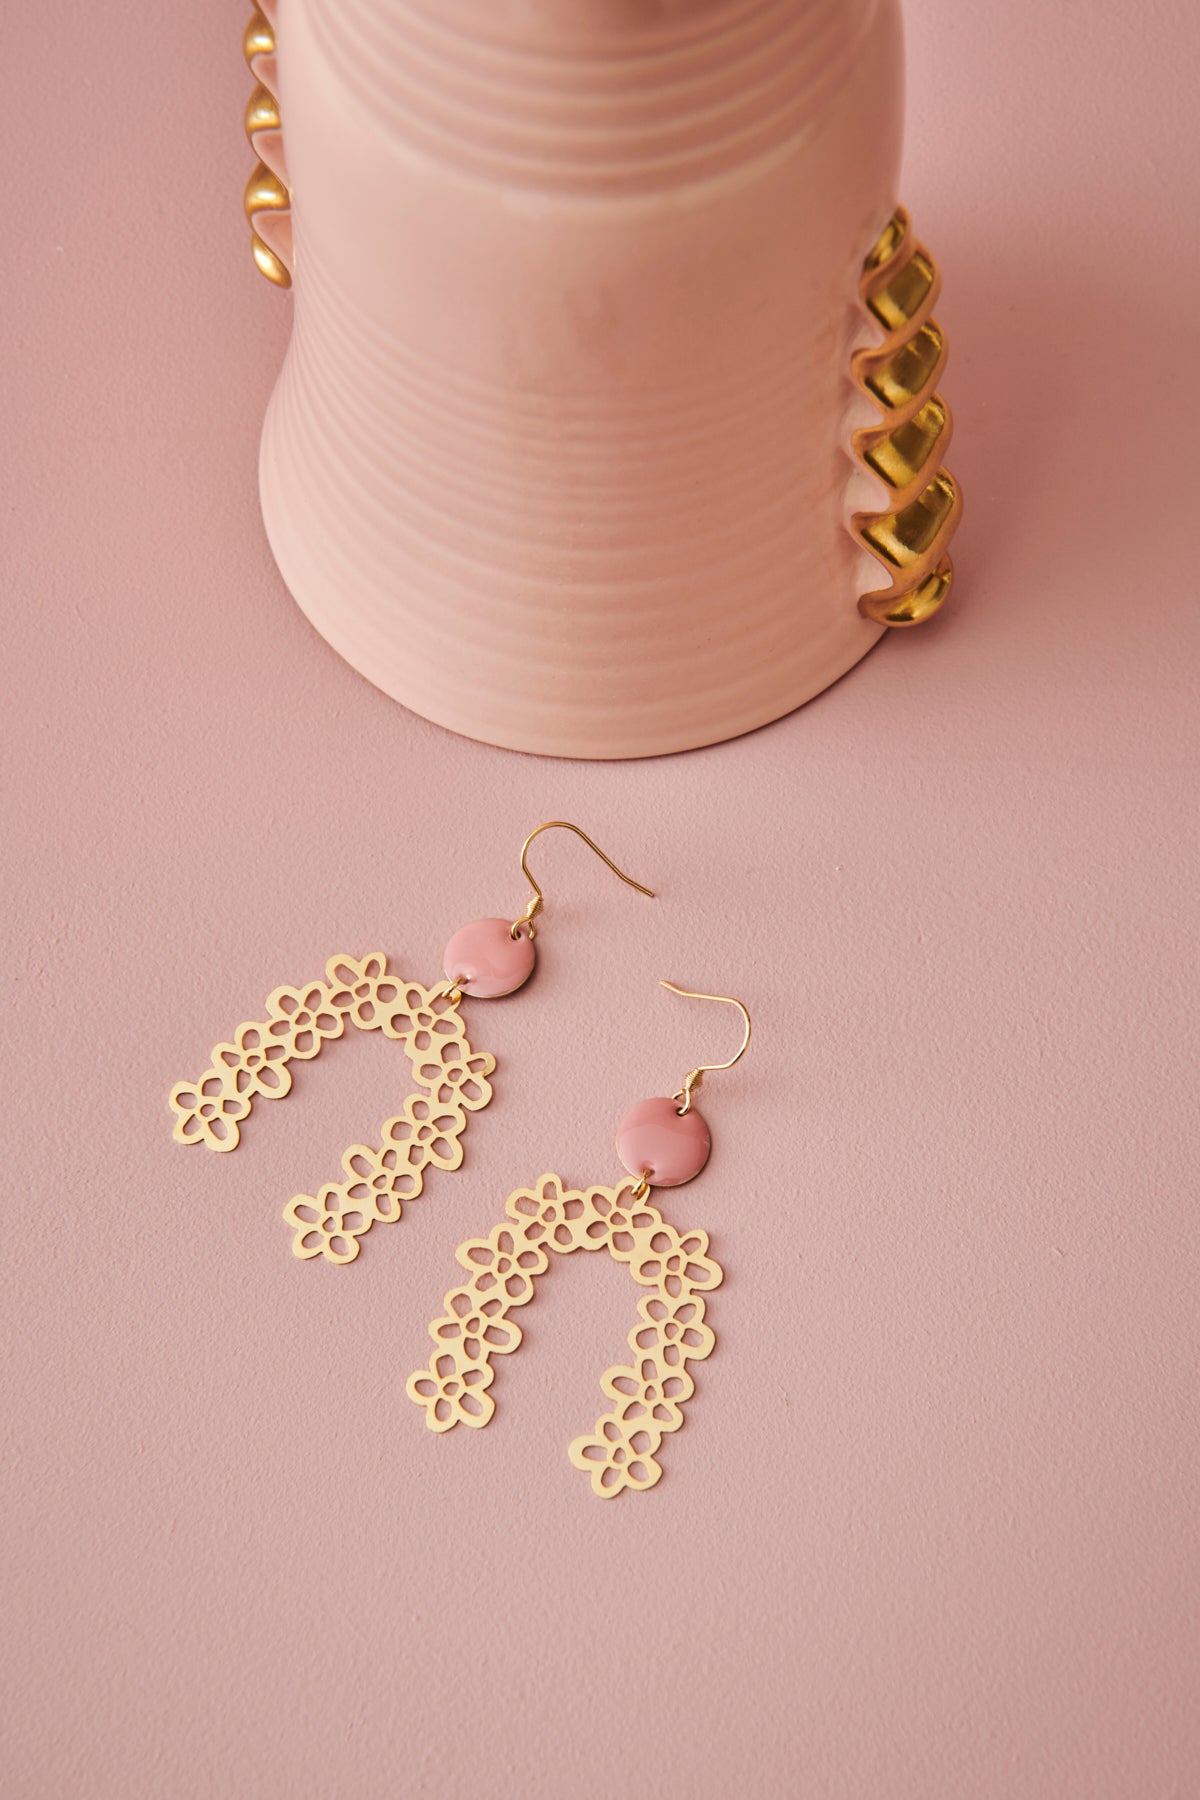 A pair of Drapery earrings in pink sit styled against a pink background. A pink vessel with gold detailing sits nearby.